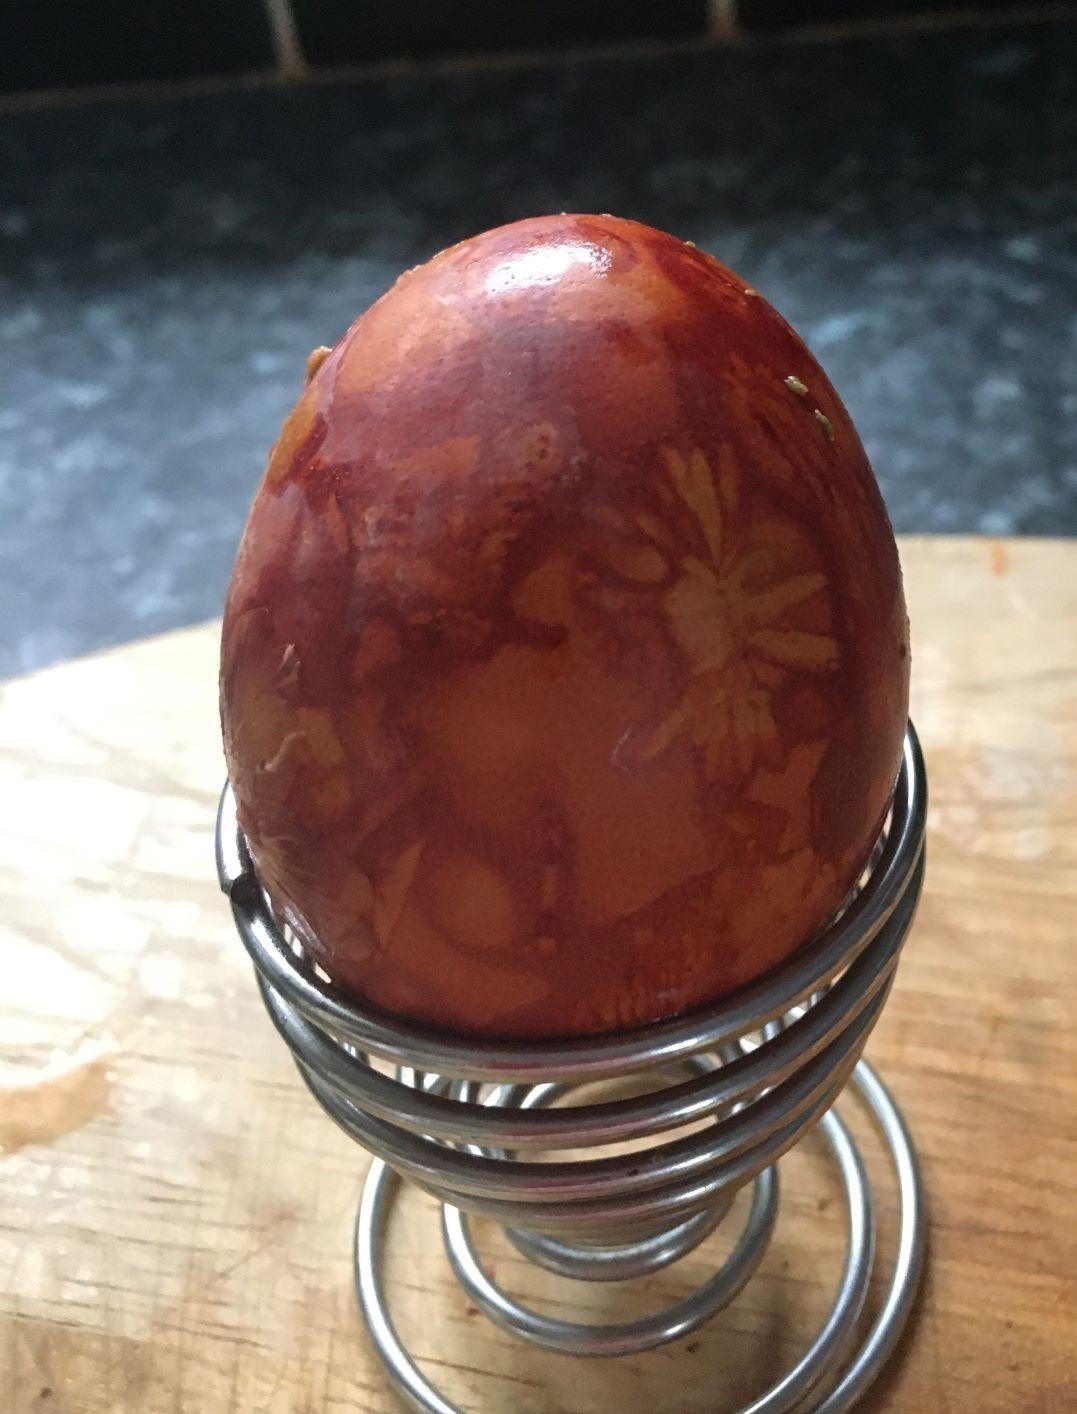 Egg that has been dyed with onion skins in a metal egg cup